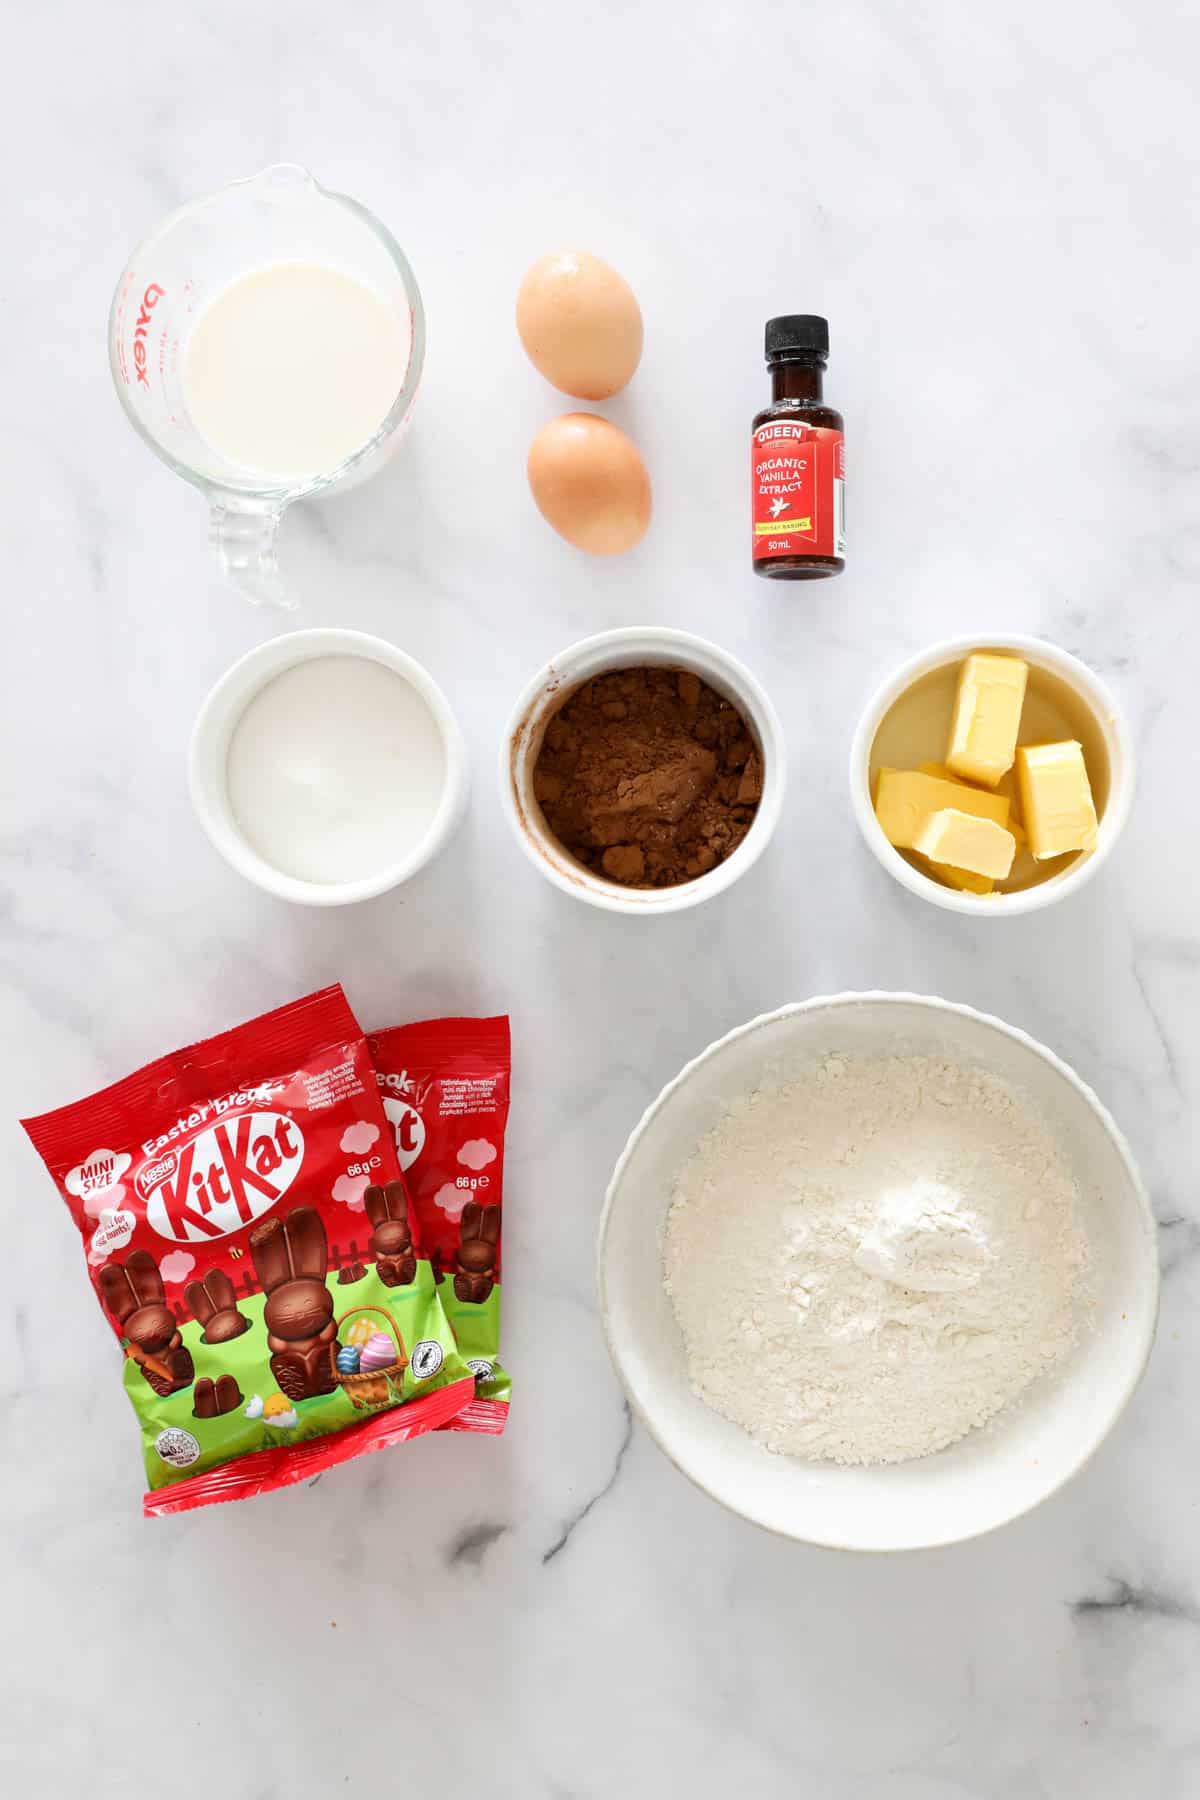 Ingredients needed to make cupcakes weighed out and placed in individual bowls.